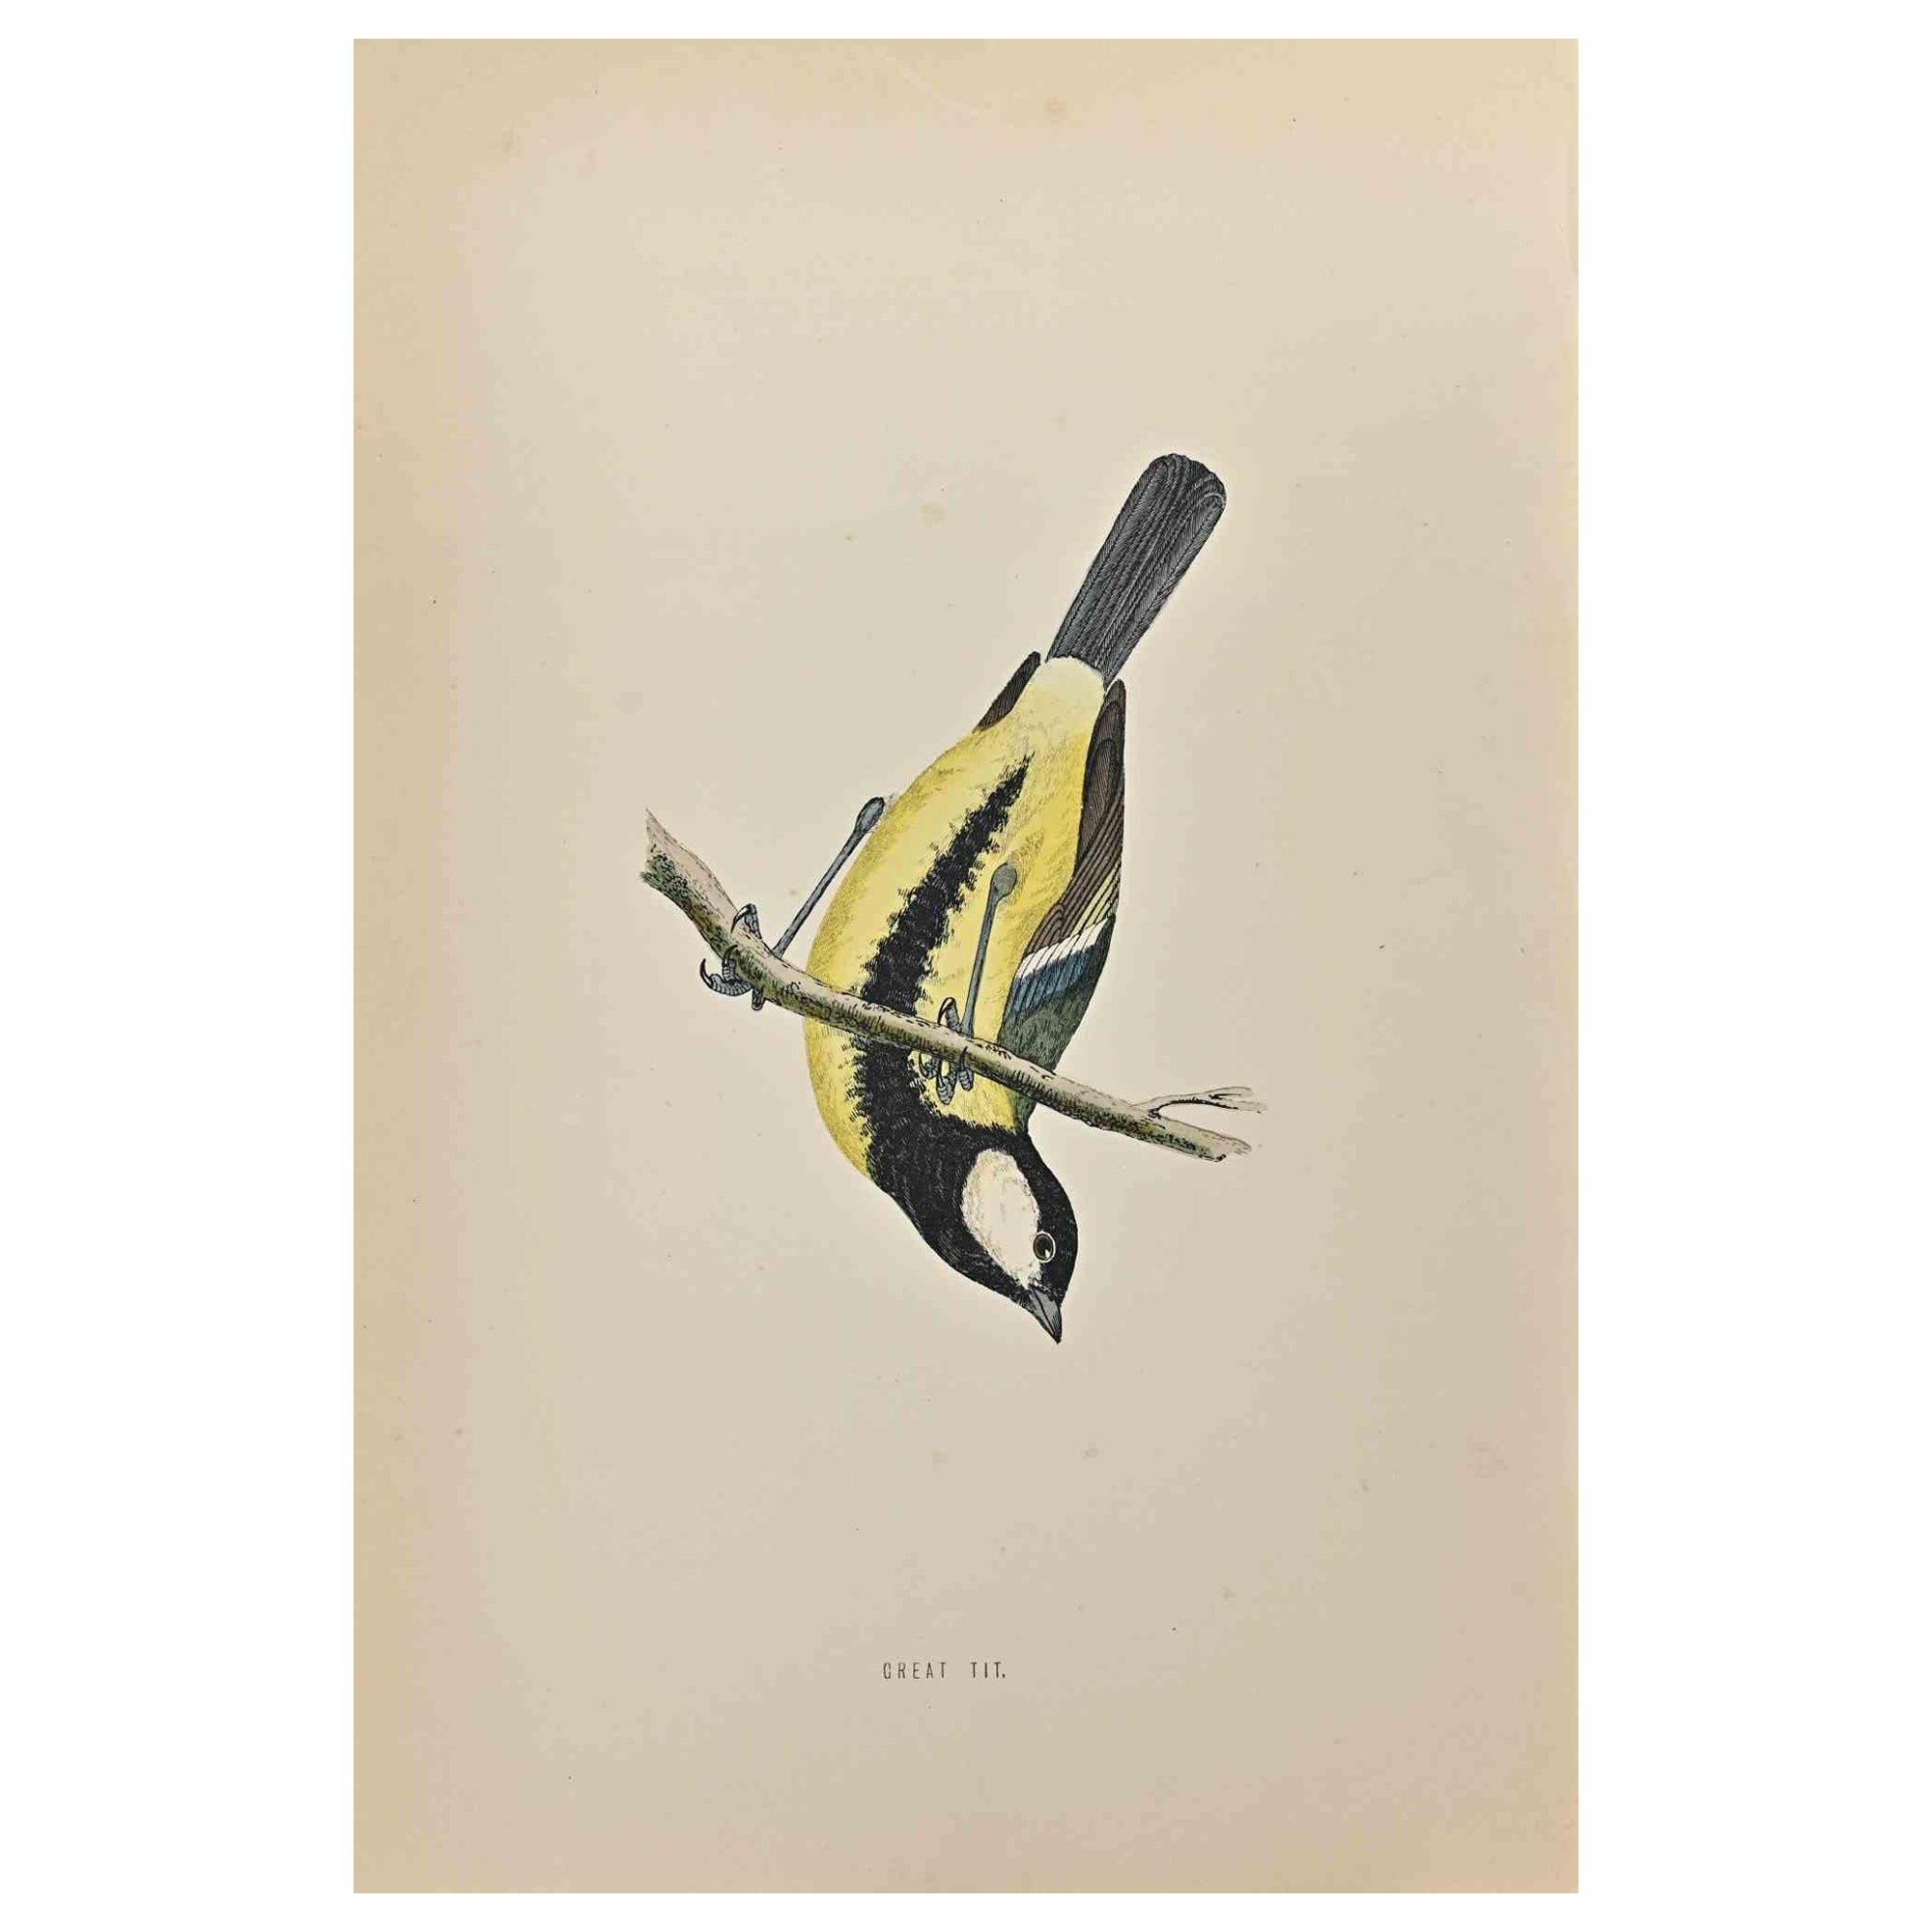 Great Tit is a modern artwork realized in 1870 by the British artist Alexander Francis Lydon (1836-1917) . 

Woodcut print, hand colored, published by London, Bell & Sons, 1870.  Name of the bird printed in plate. This work is part of a print suite